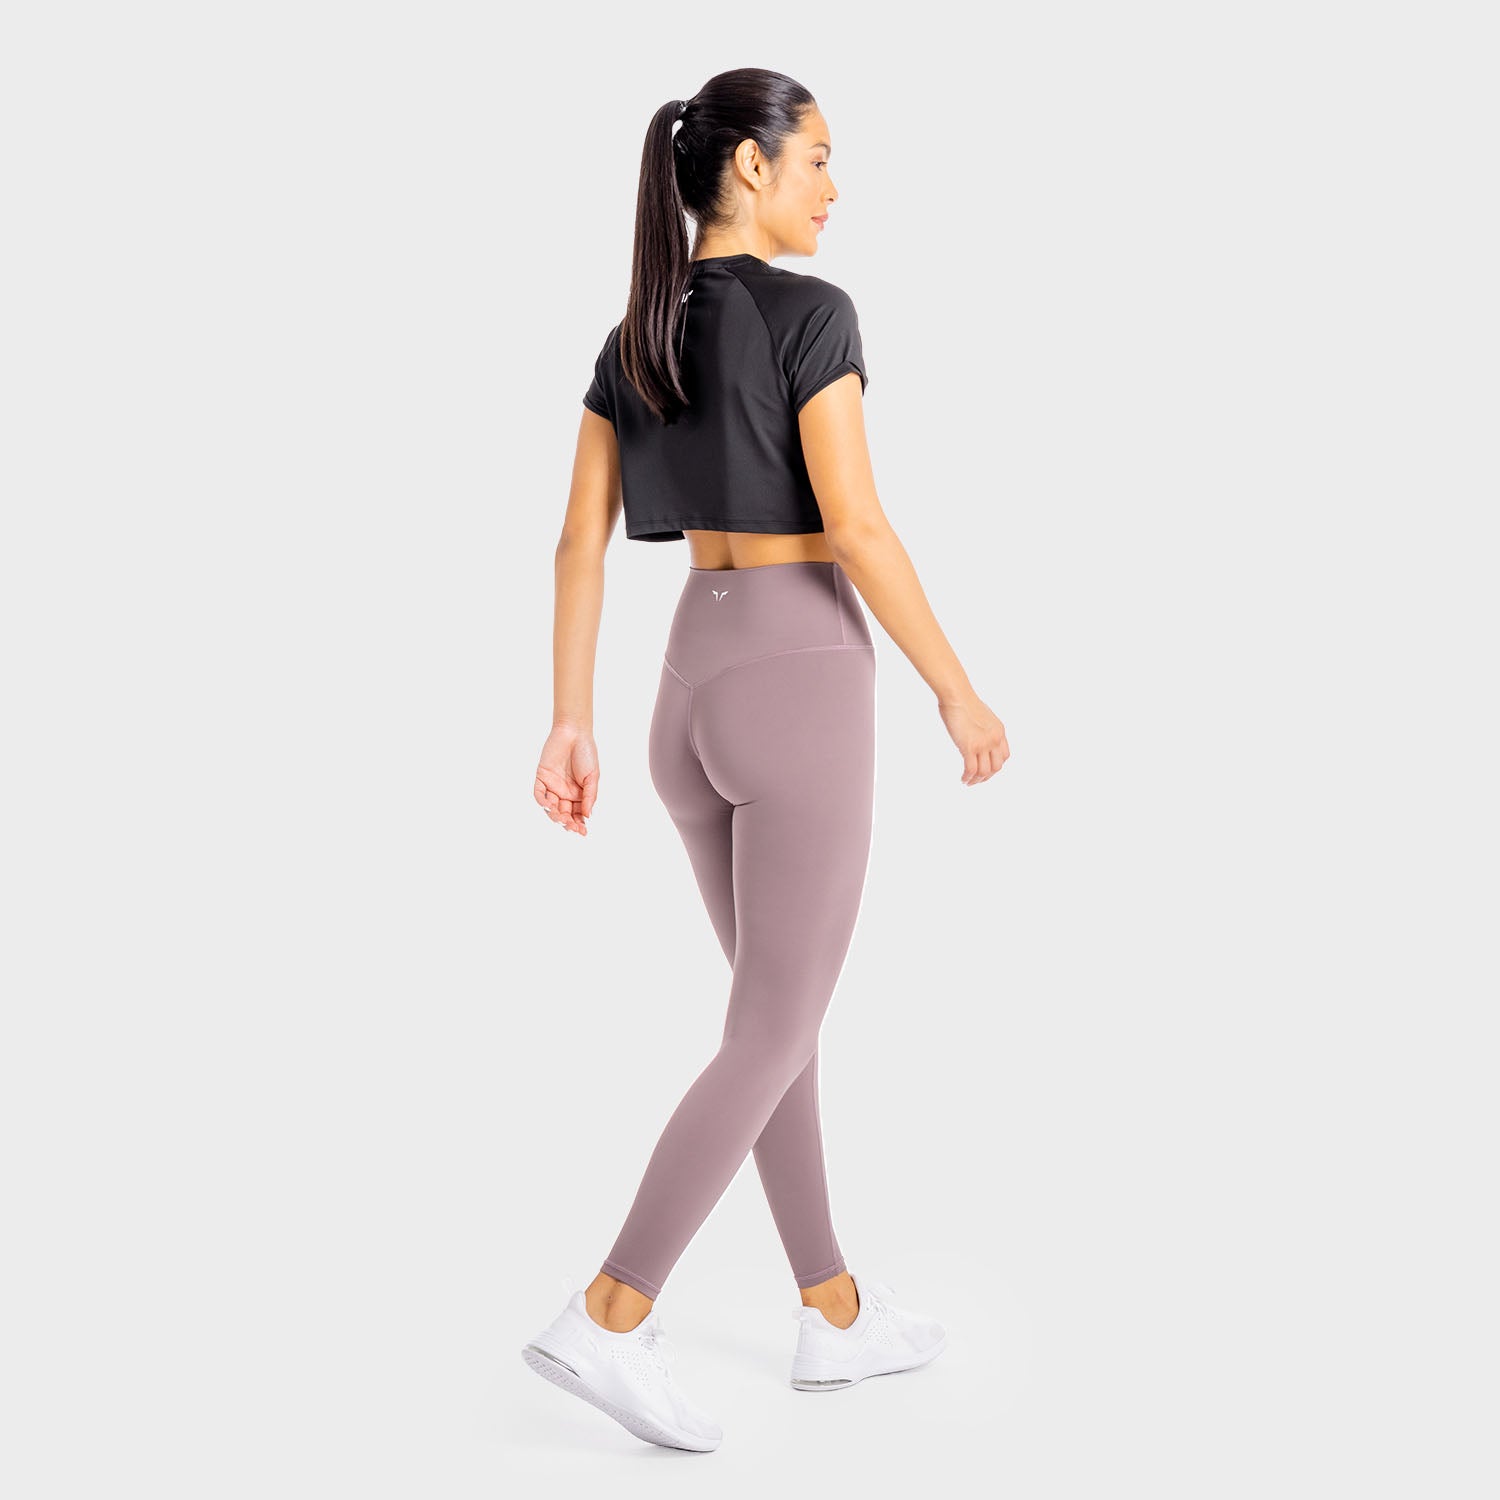 Enamor Dry Fit, High Waist Legging | Seamless Workout Legging With Per